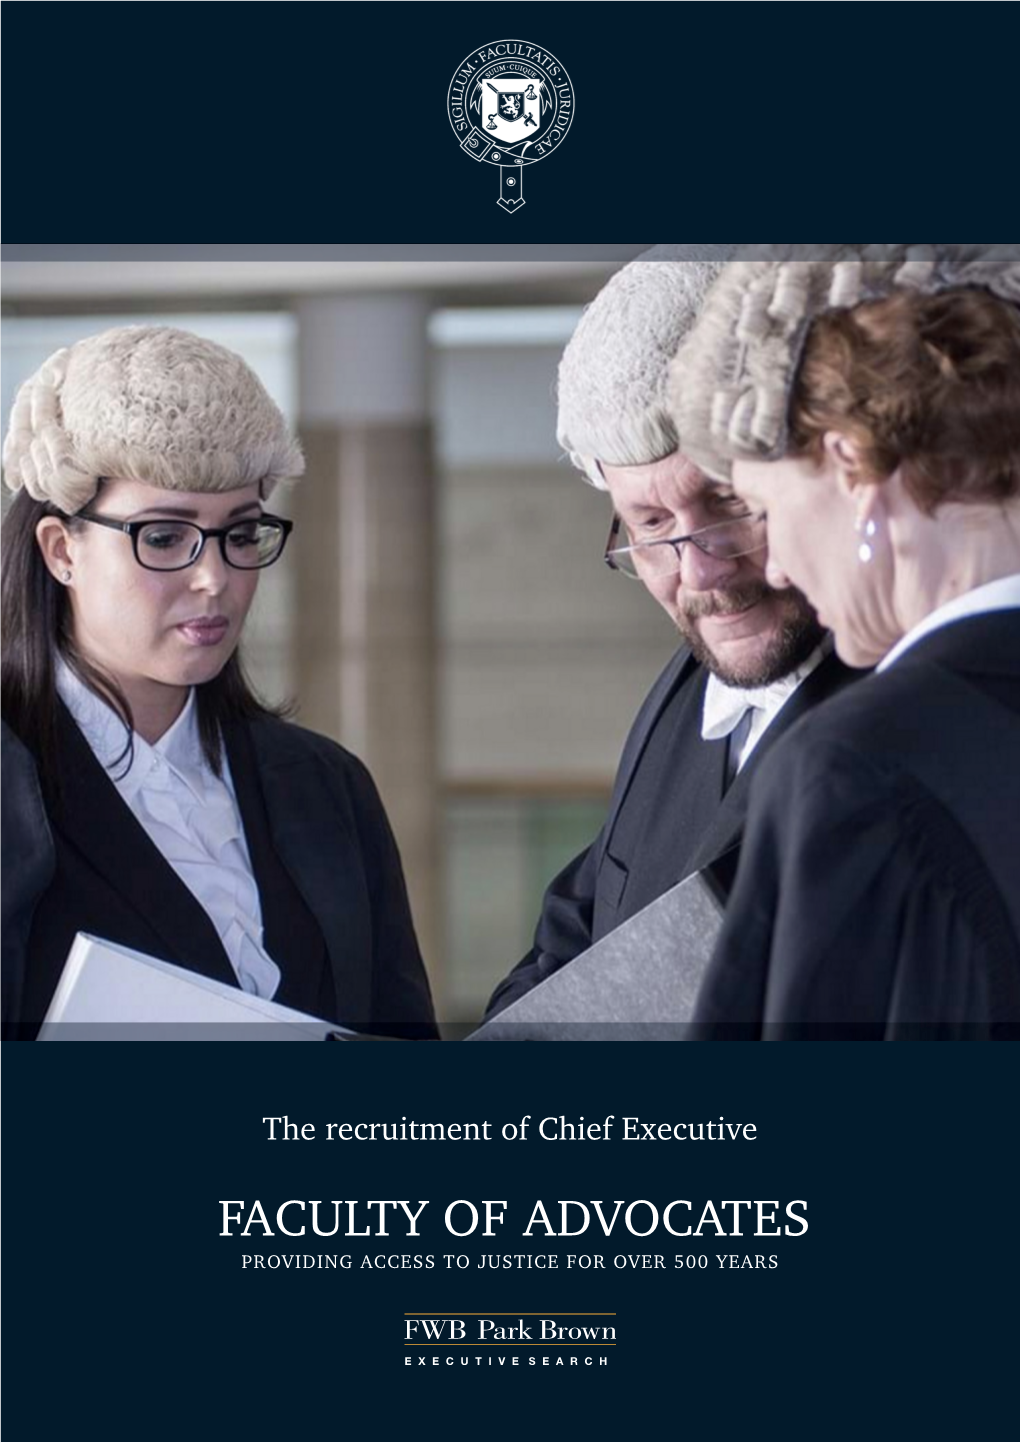 Faculty of Advocates Providing Access to Justice for Over 500 Years